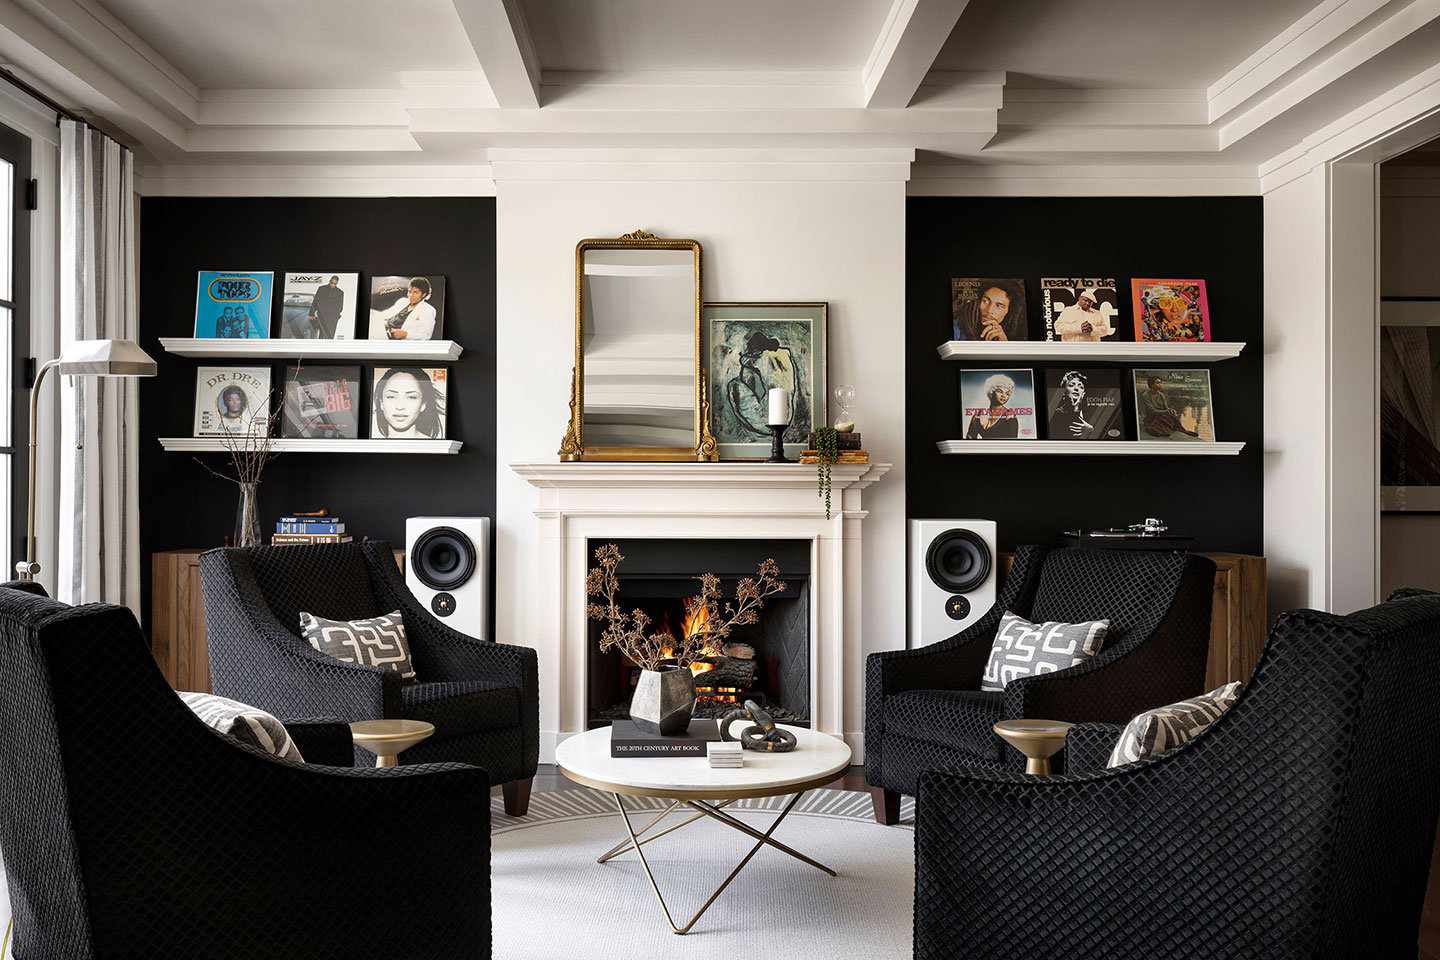 Living room with black walls, white furniture. Modern and stylish. Size of the artwork not specified